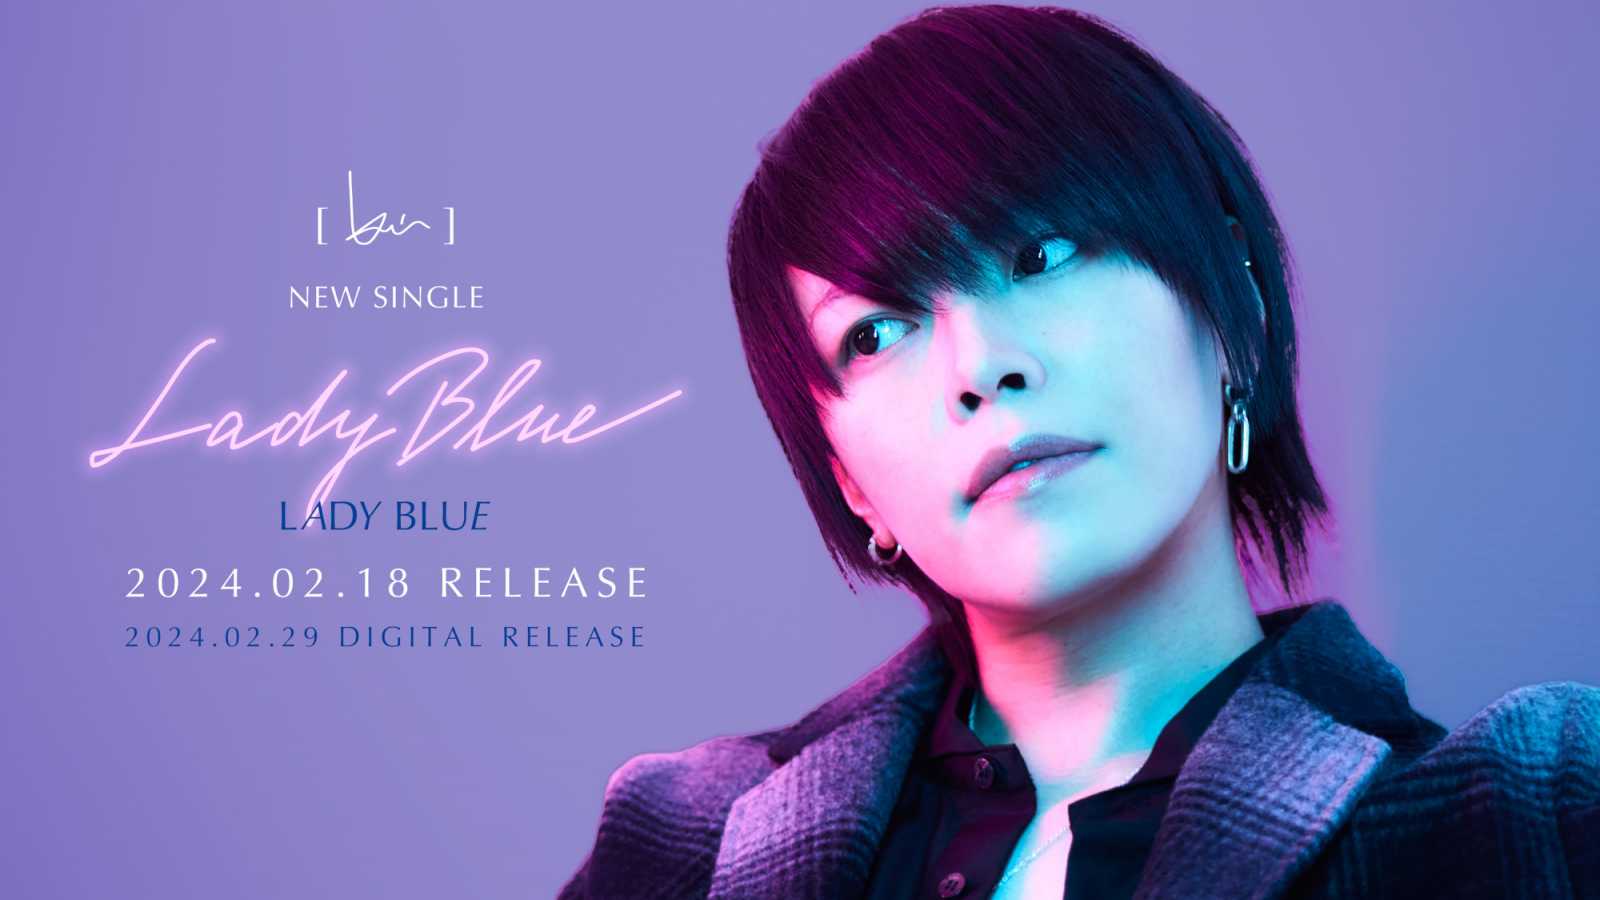 Vier fortlaufende Singles von [ kei ] © [ kei ]. All rights reserved.